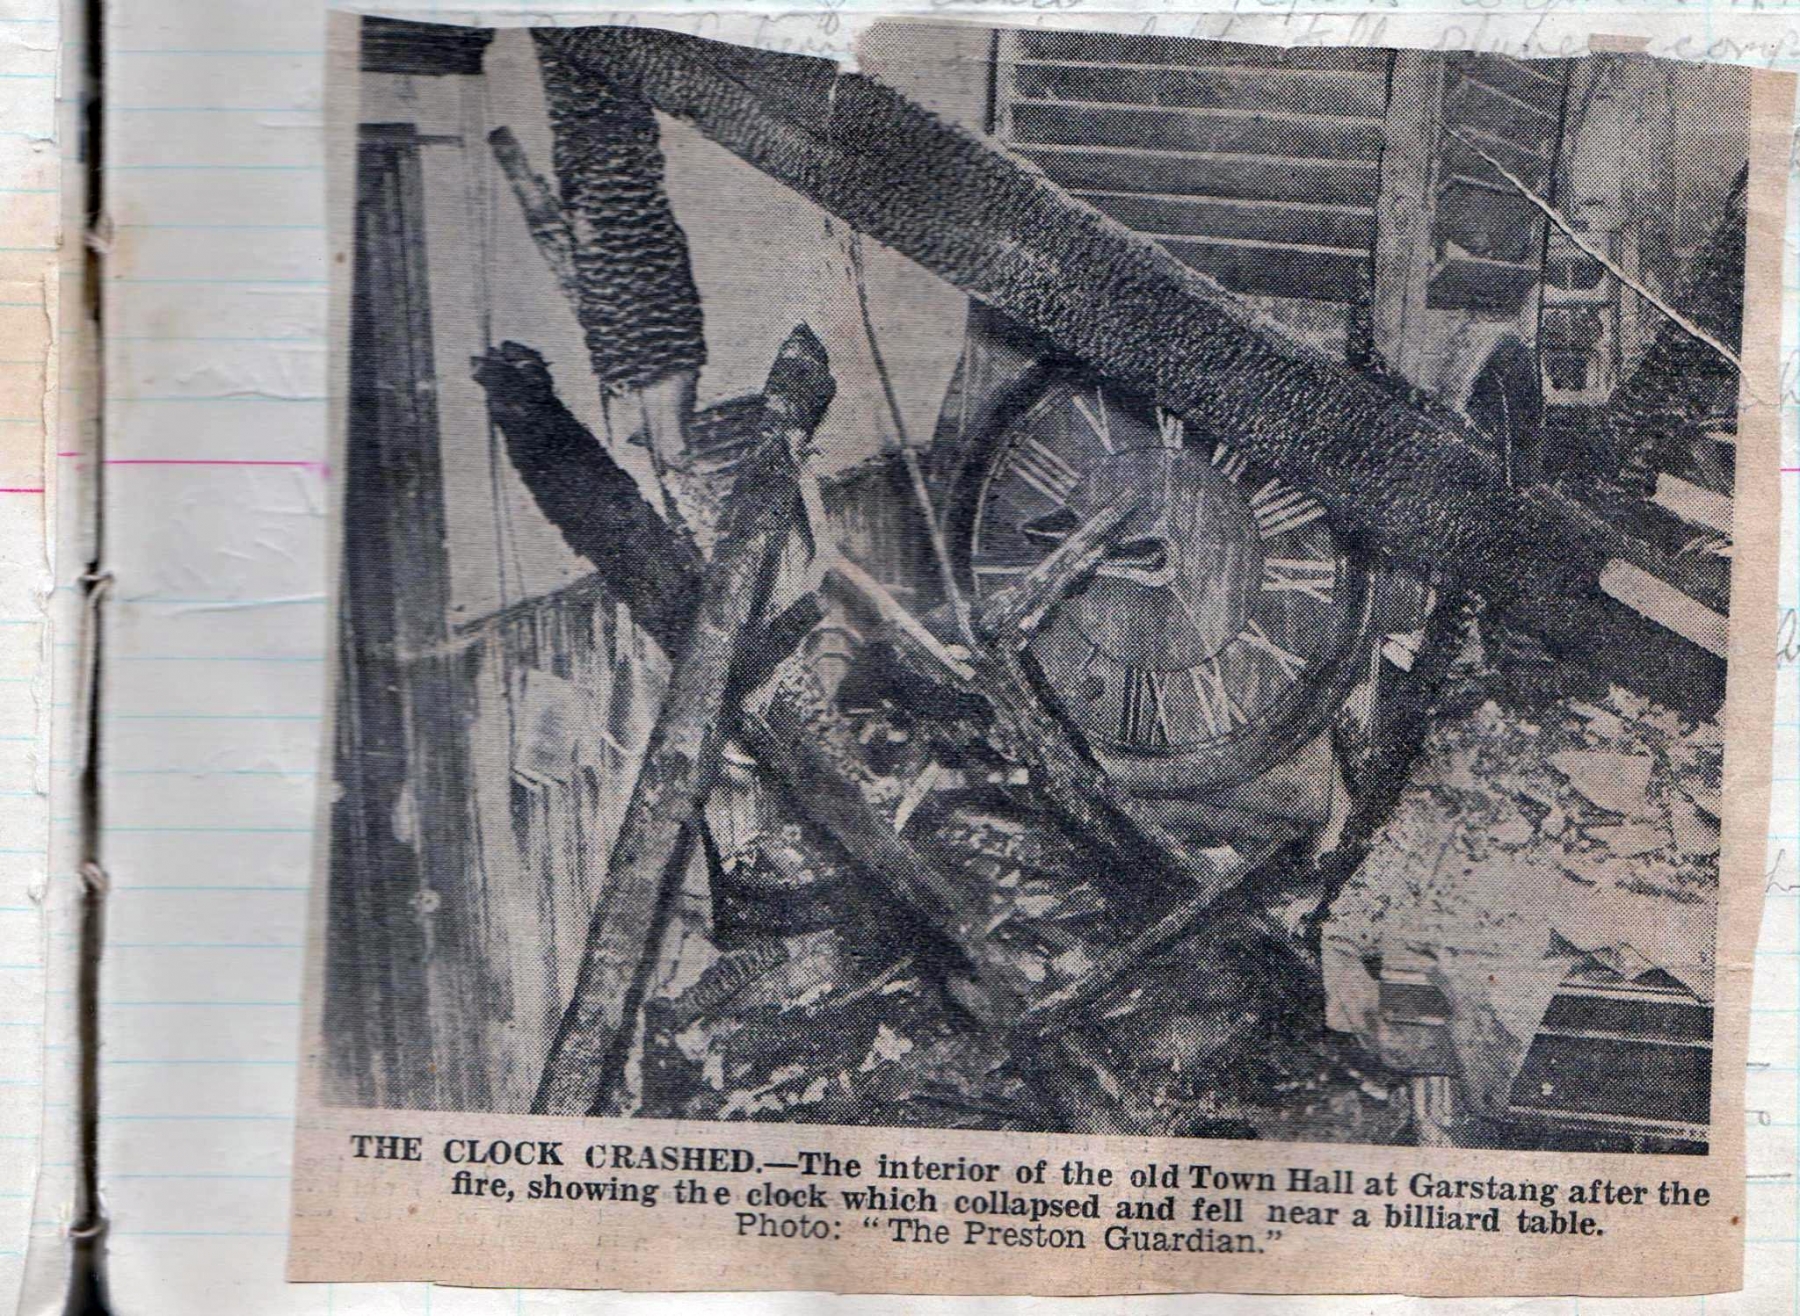 Newspaper clipping about the Town Hall fire (courtesy of Paul Smith)